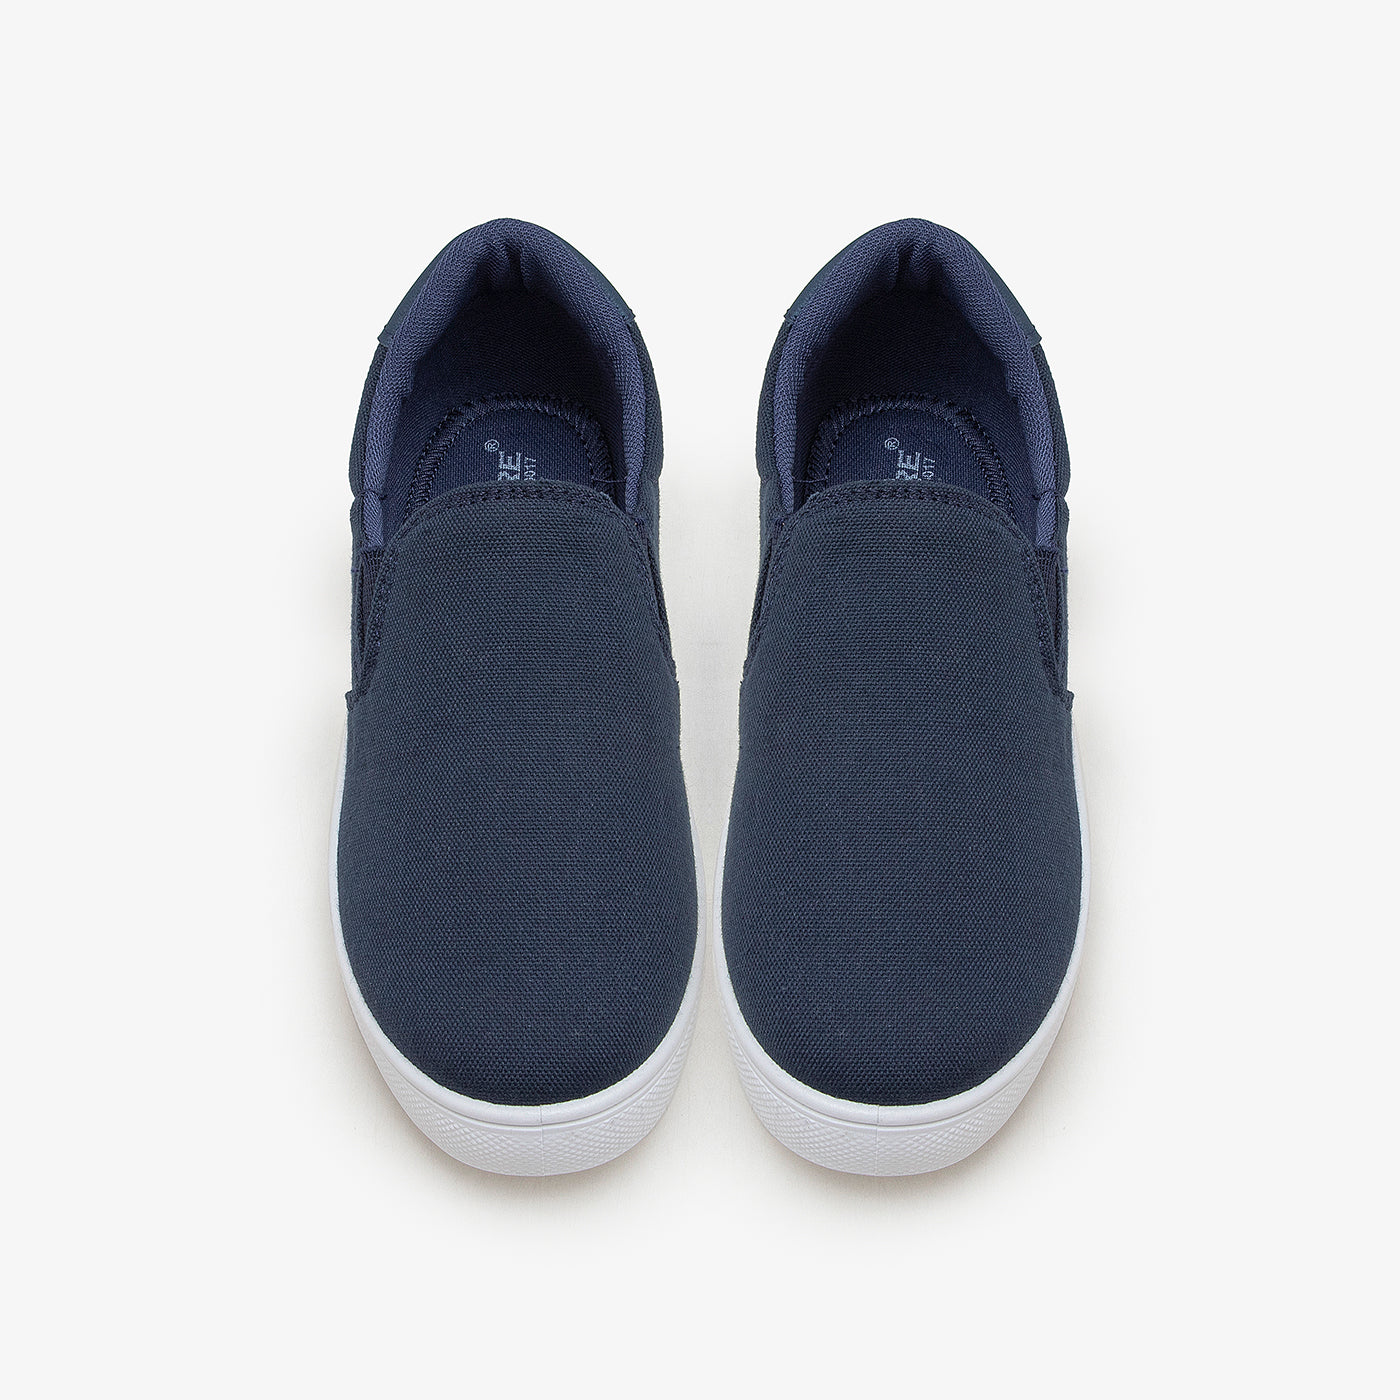 Blue casual shoes in Pakistan